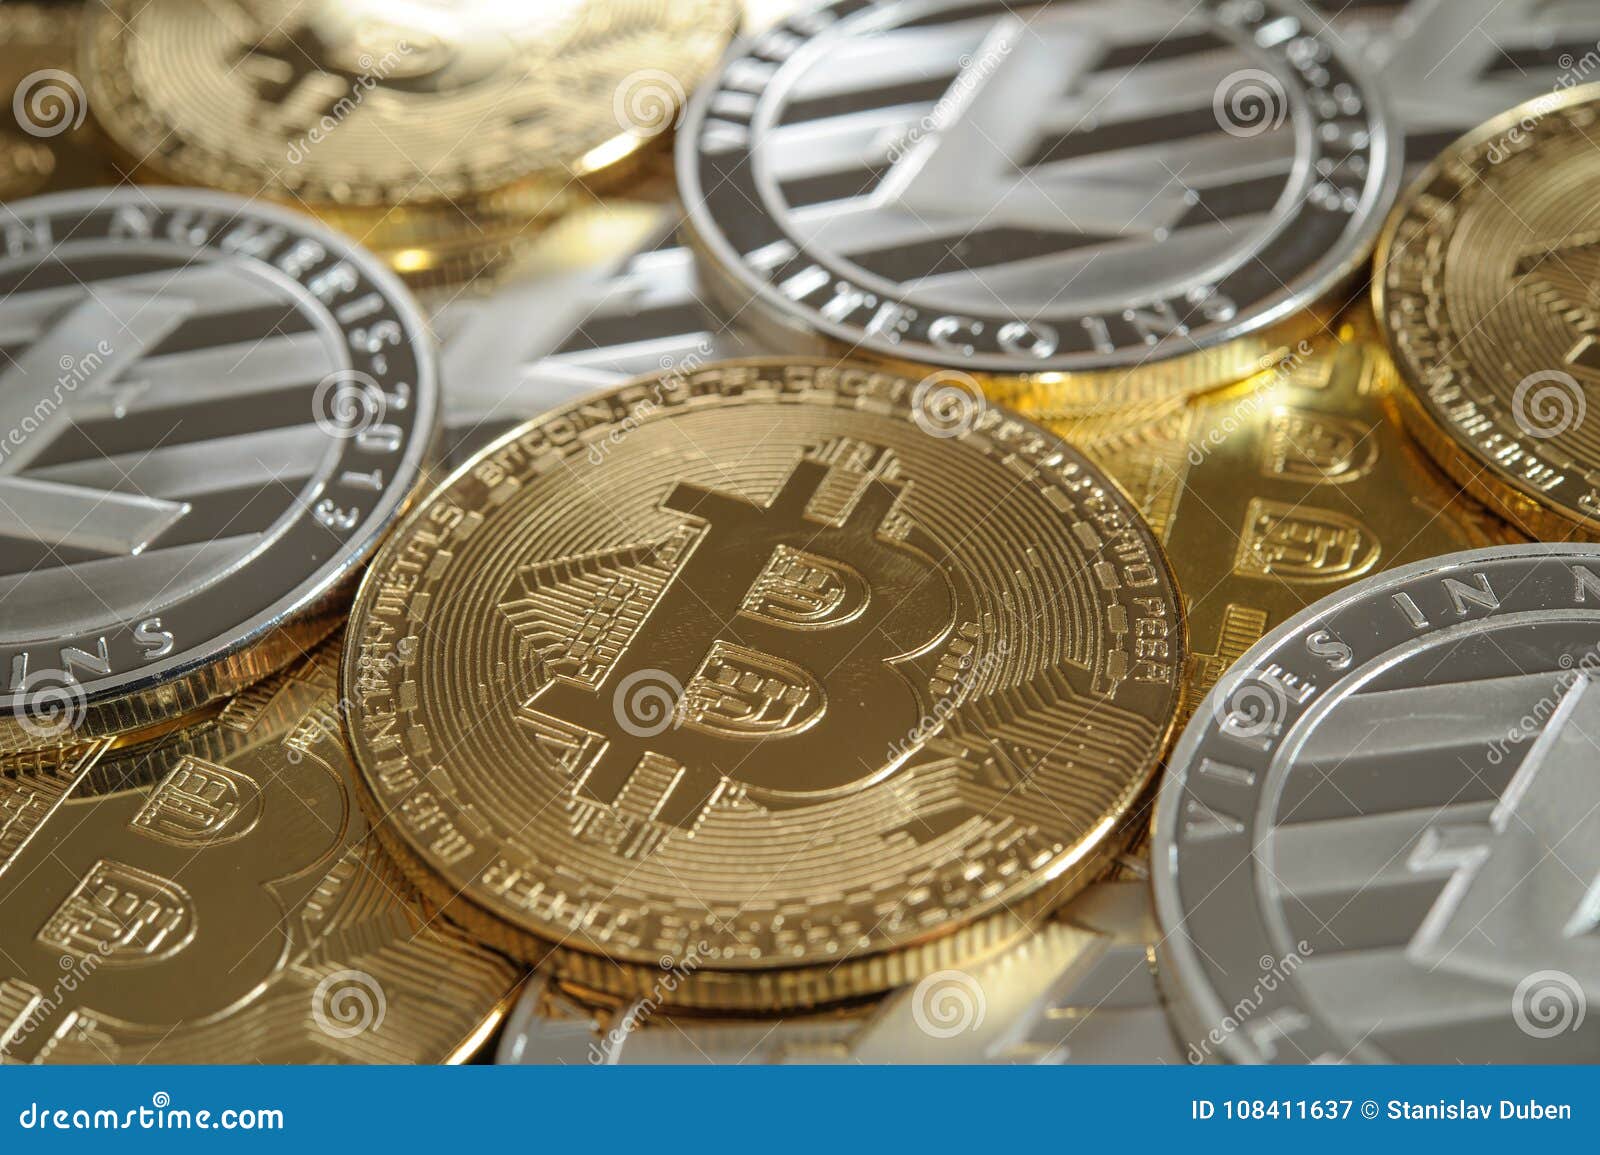 Stack Of Golden Bitcoin And Silver Litecoin Coins Stock Image - Image ...